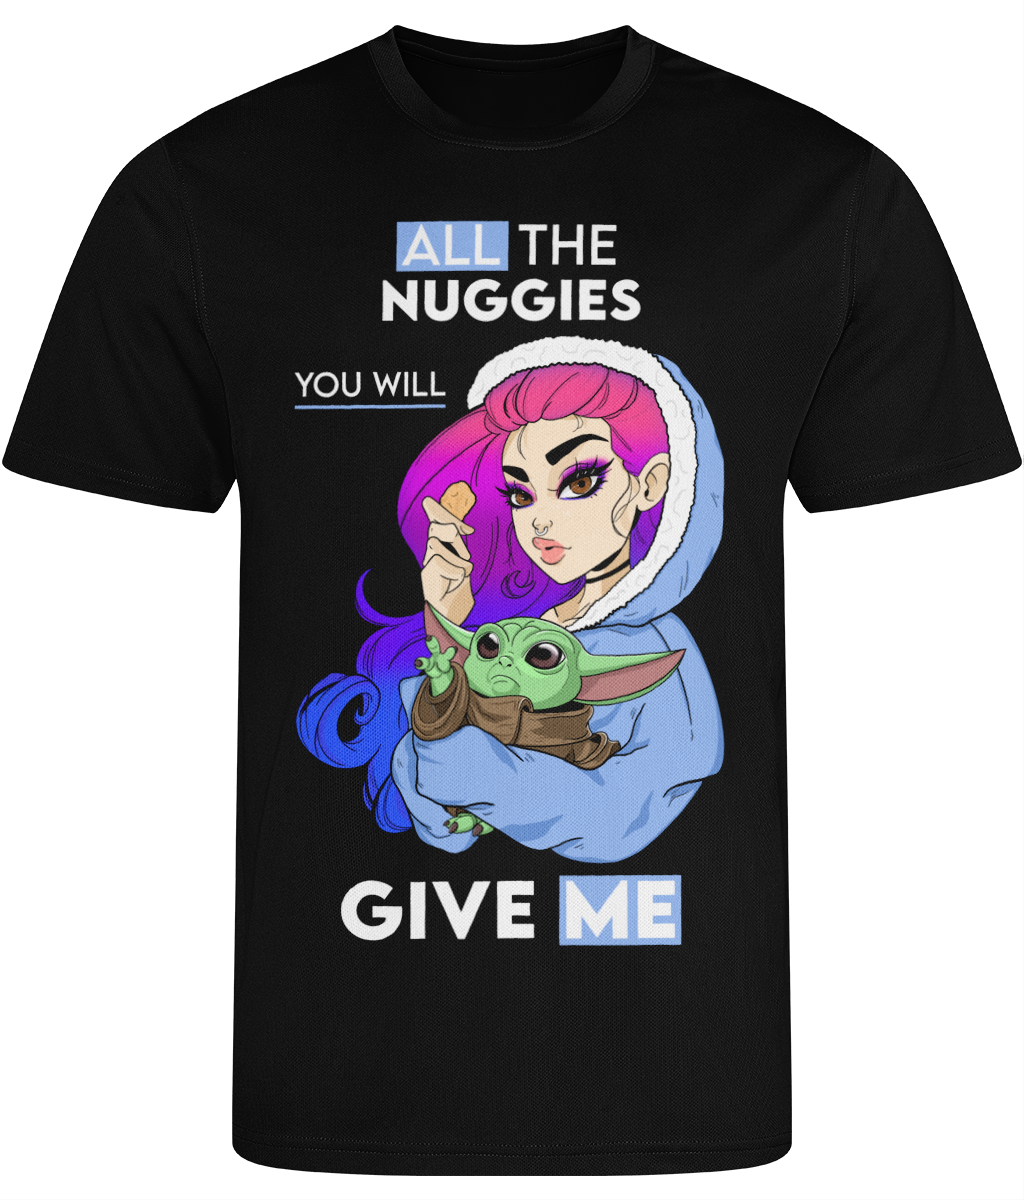 Pixie Cake Face 'All The Nuggies' Men's Cool Sports T-shirt